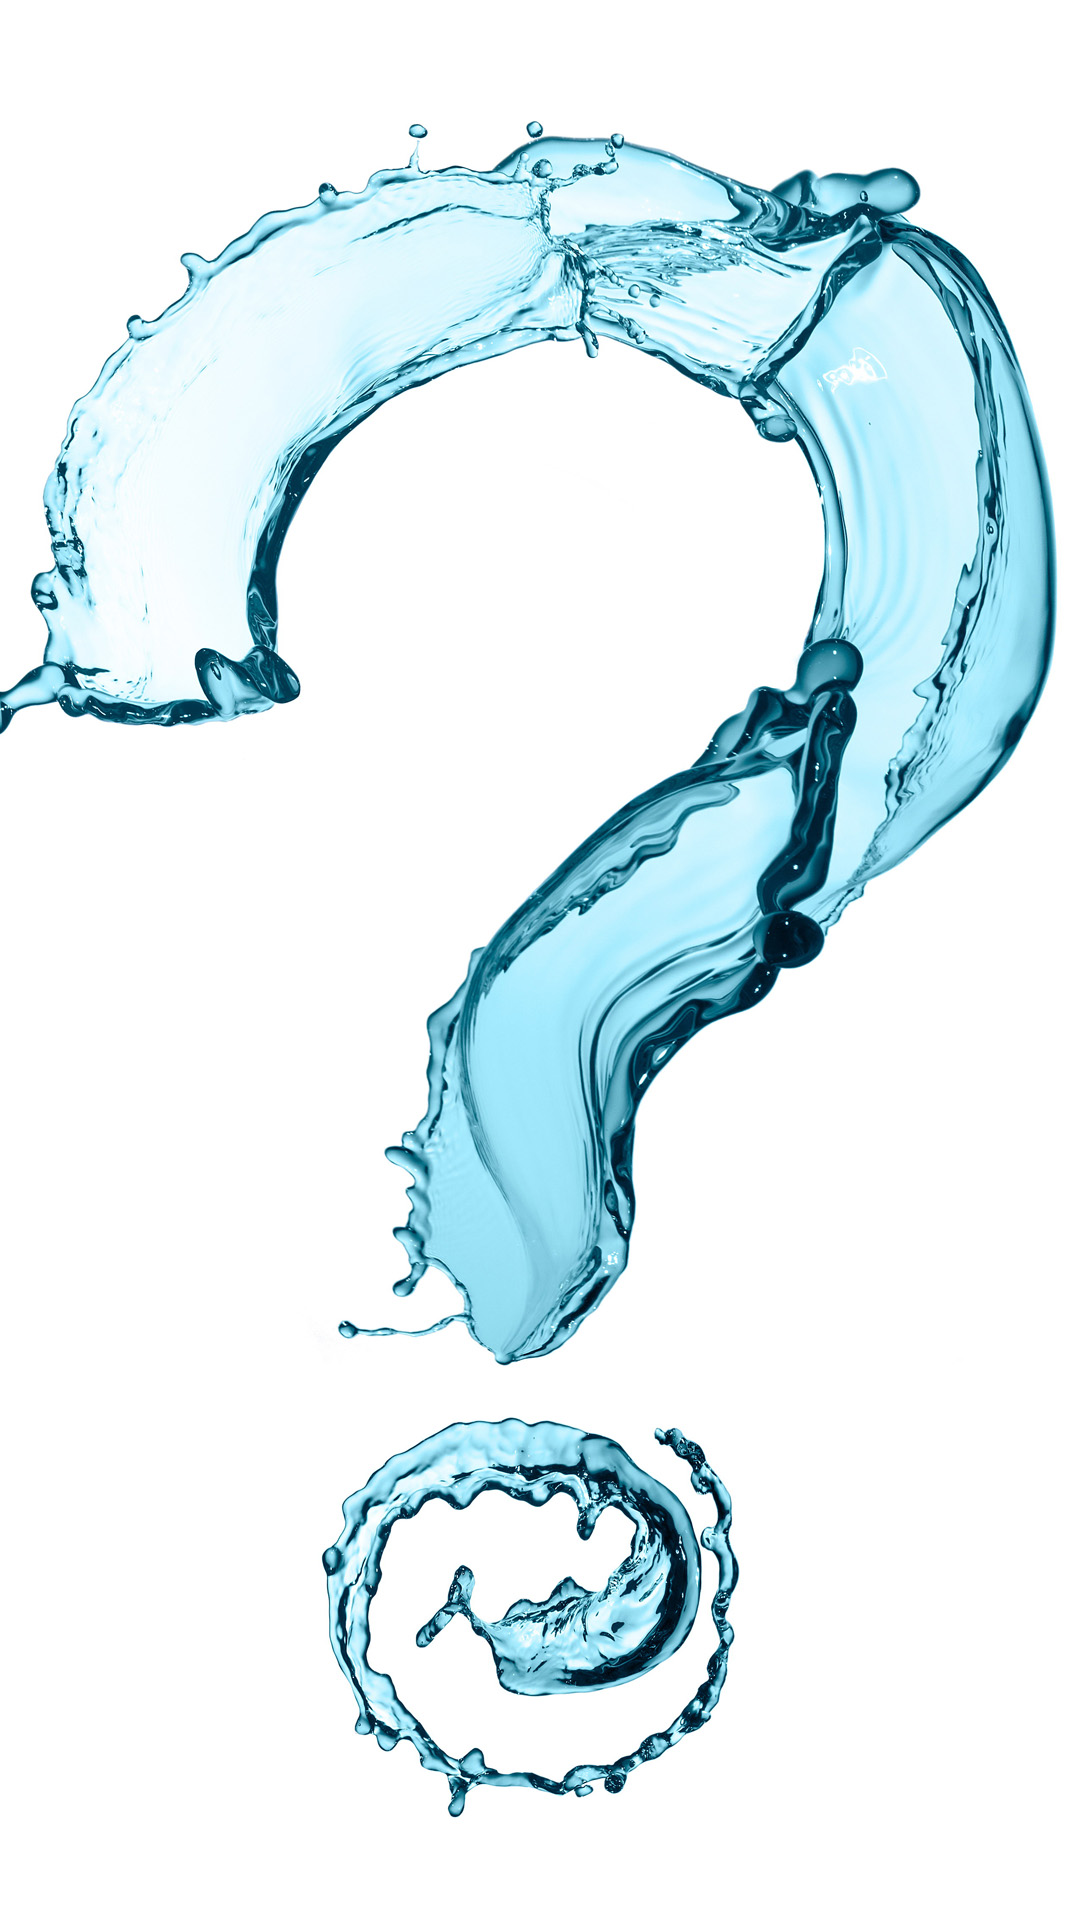 Creative Water question mark Android wallpaper